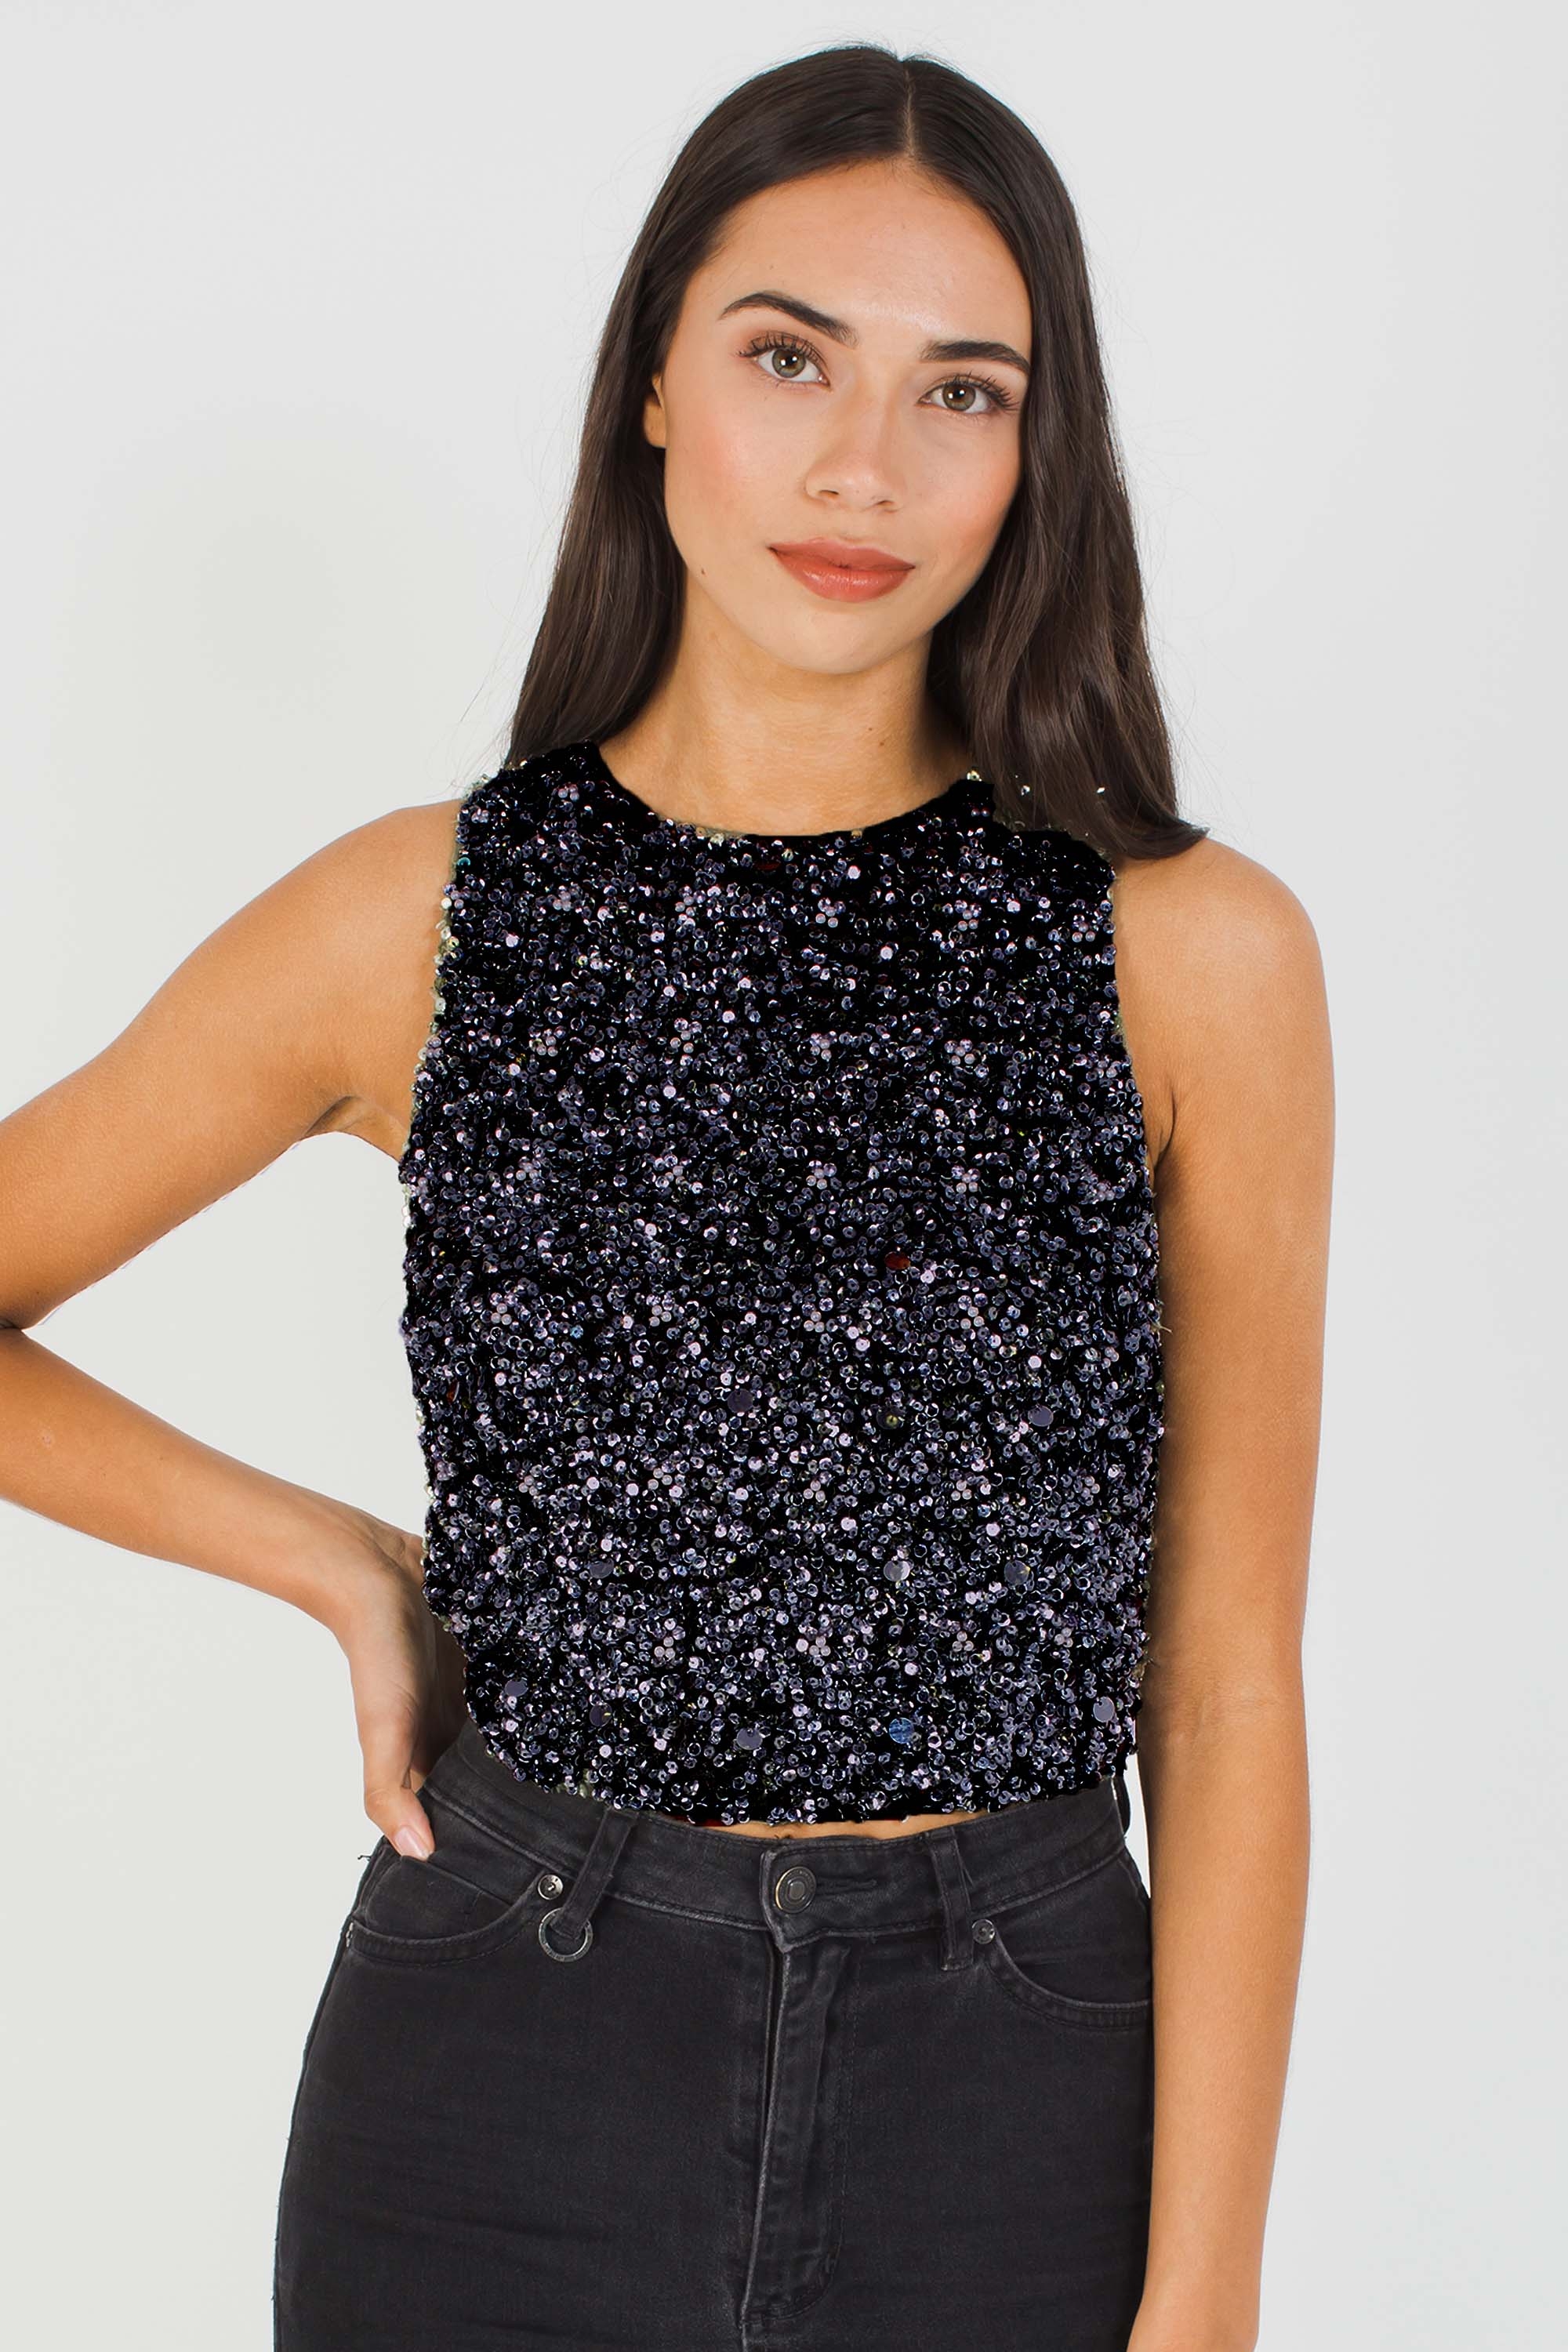 Lace & Beads Picasso Iridescent Black Sequin Top